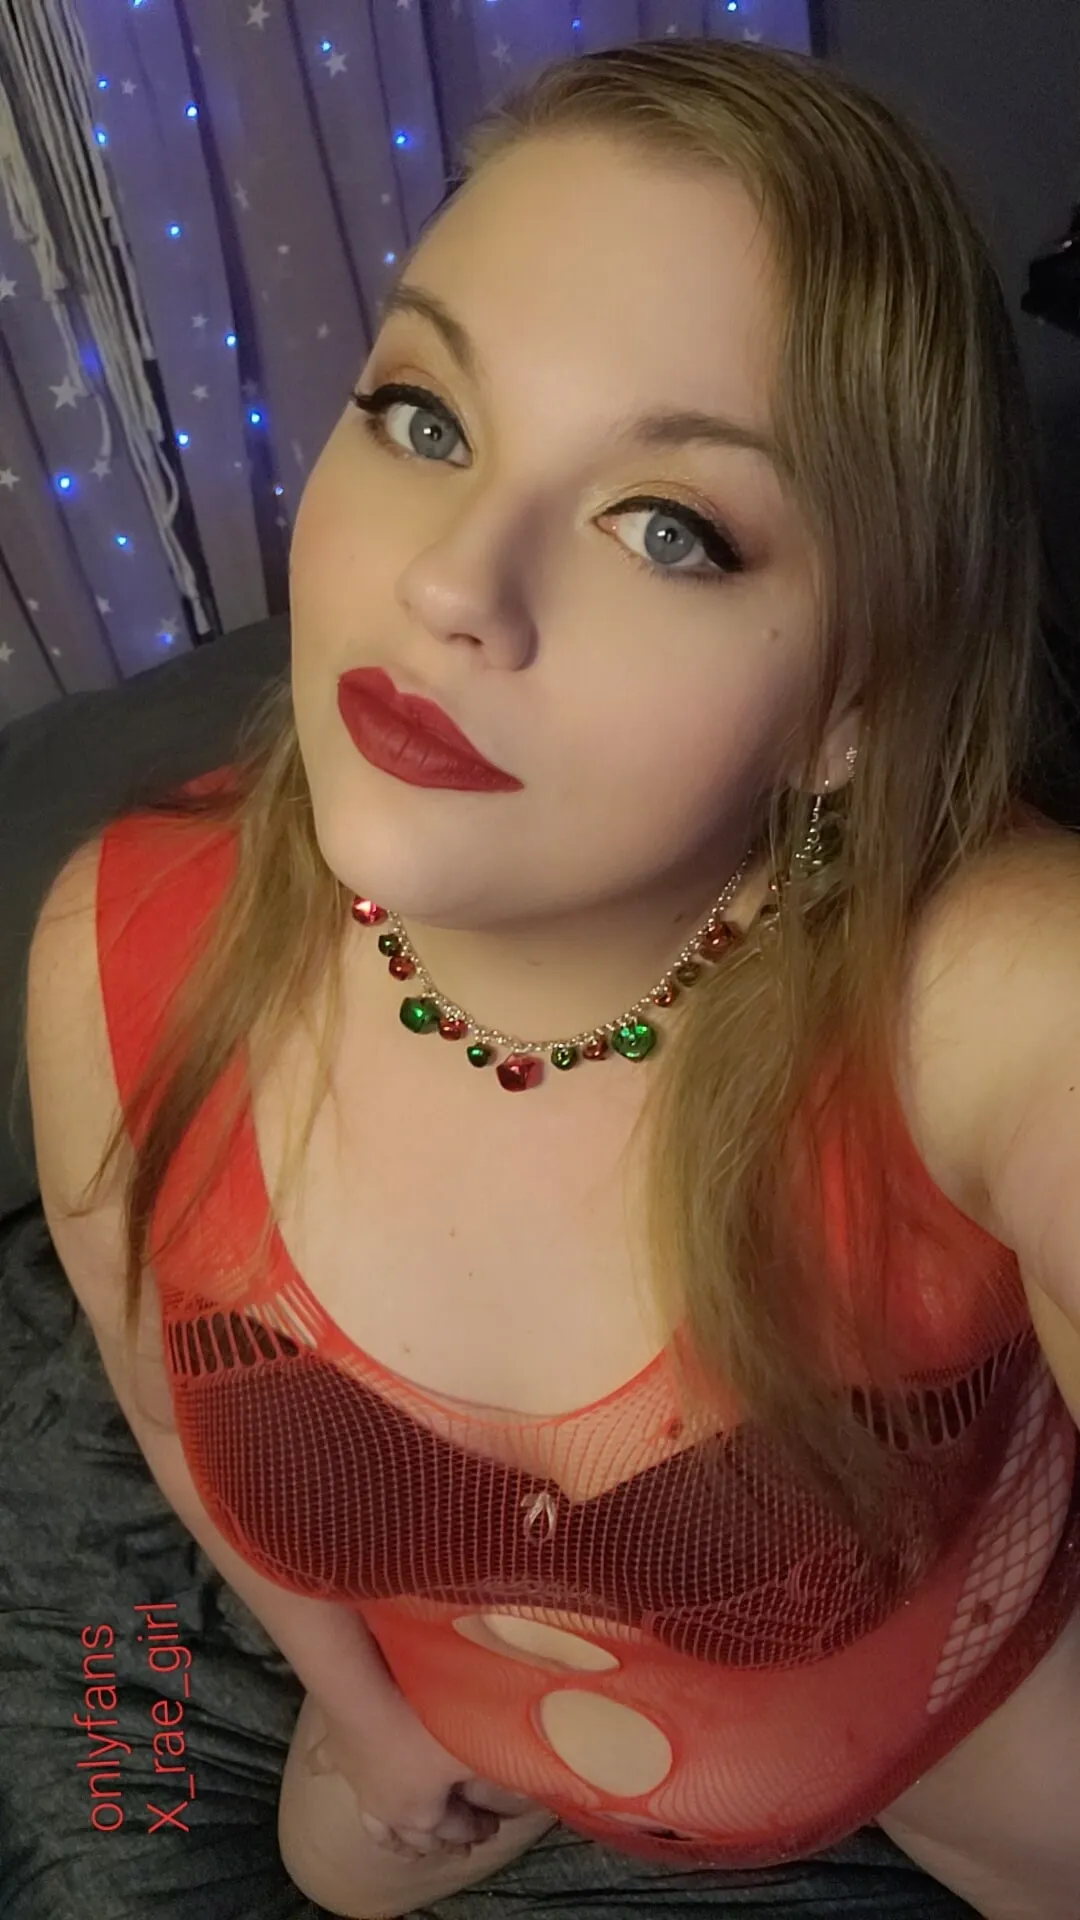 Bbw milf is your Christmas present